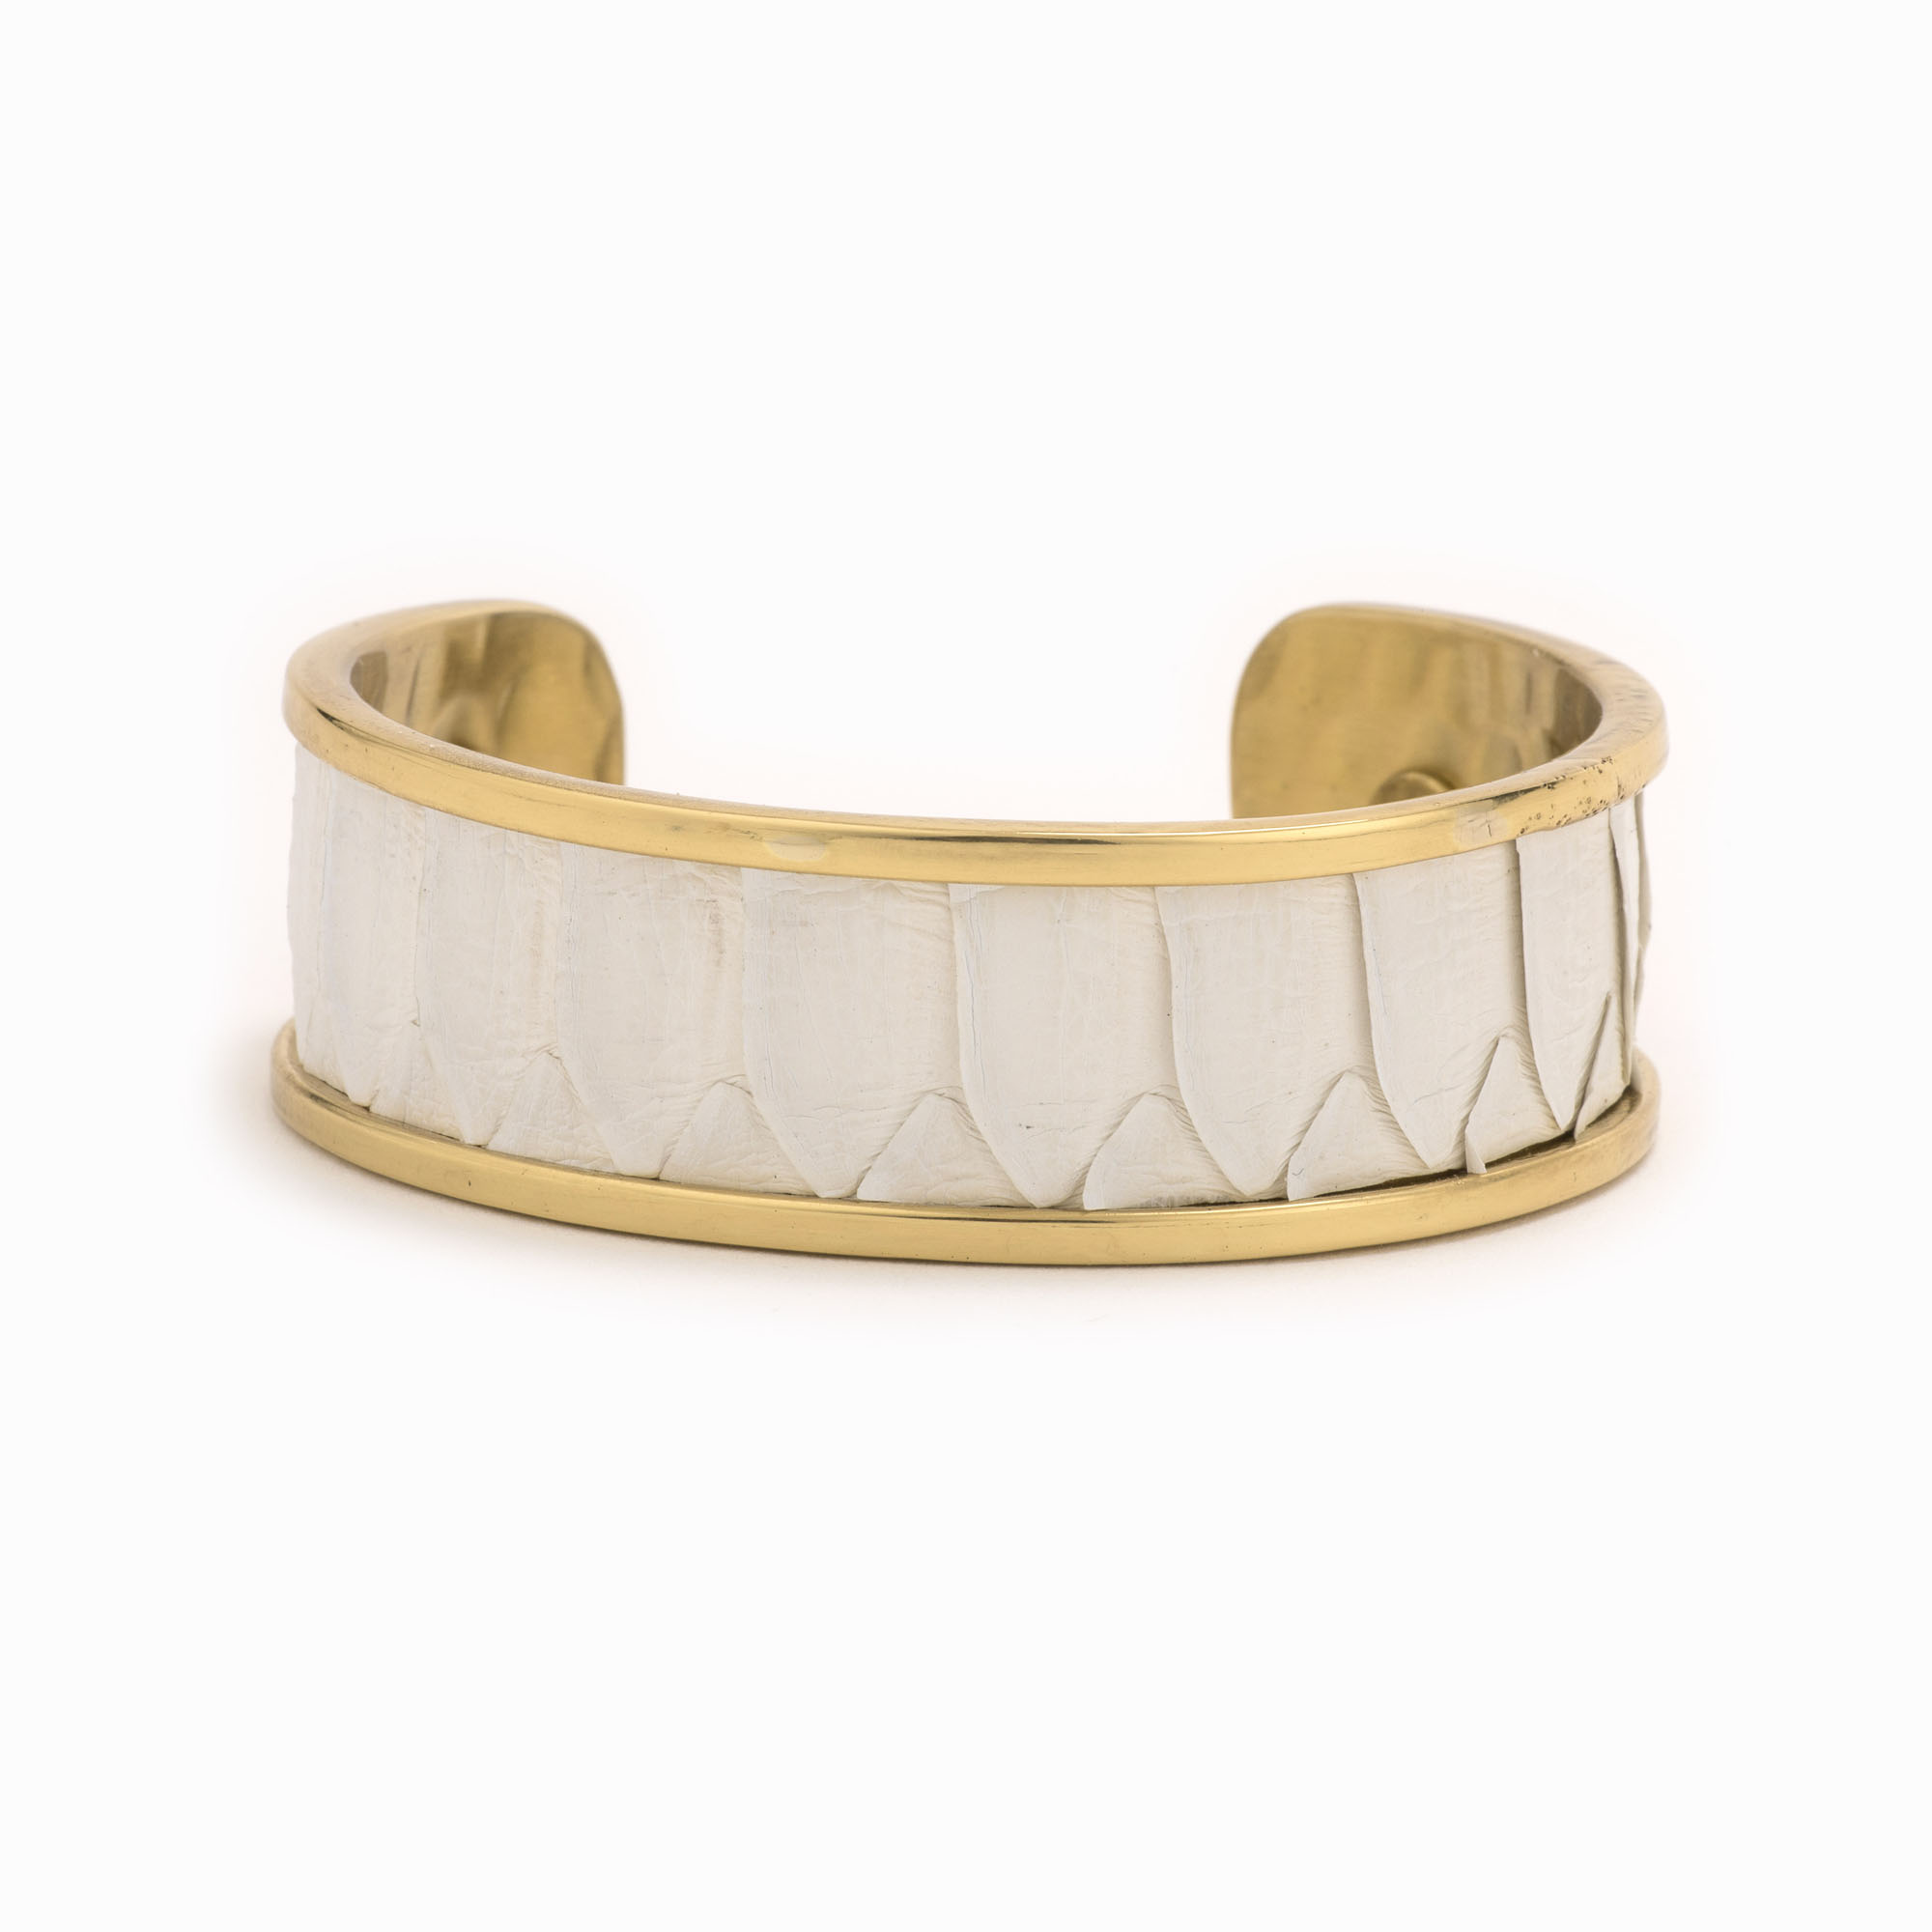 Featured image for “Medium White Gold Cuff”